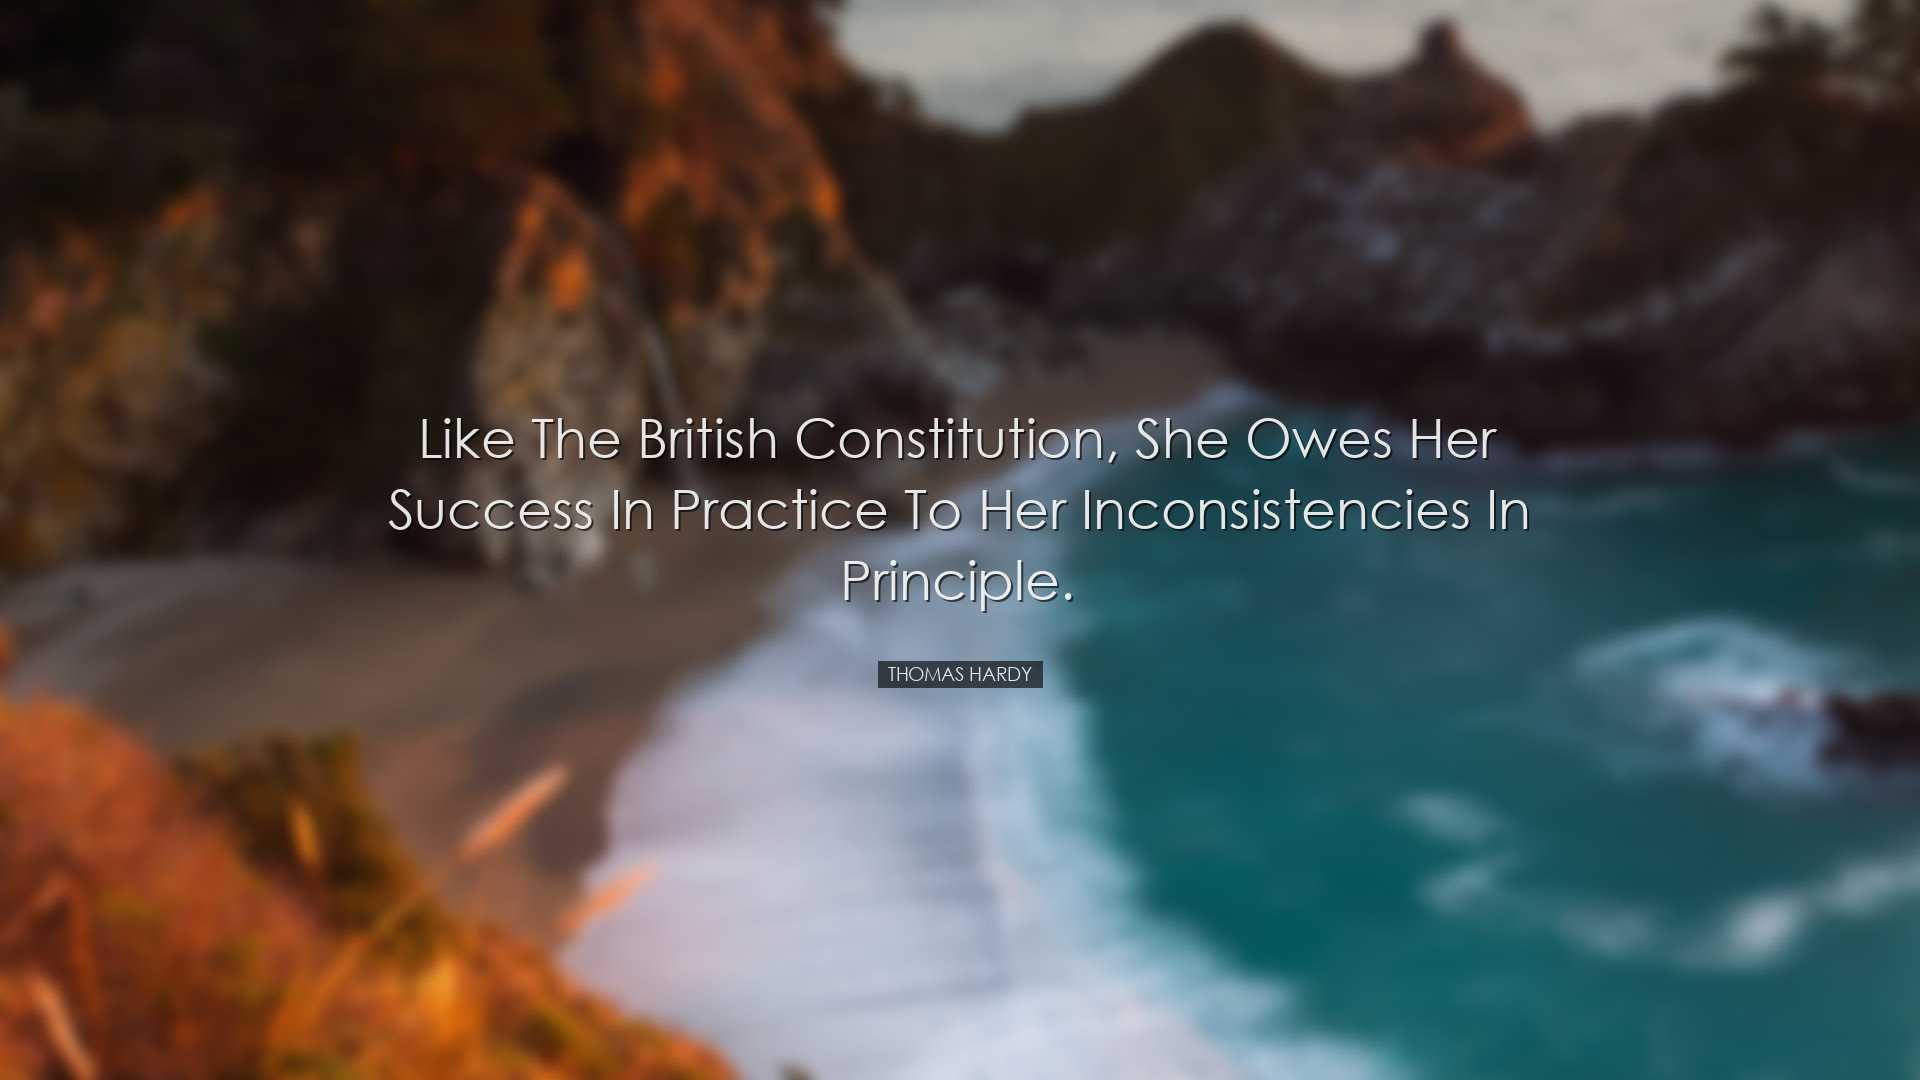 Like the British Constitution, she owes her success in practice to